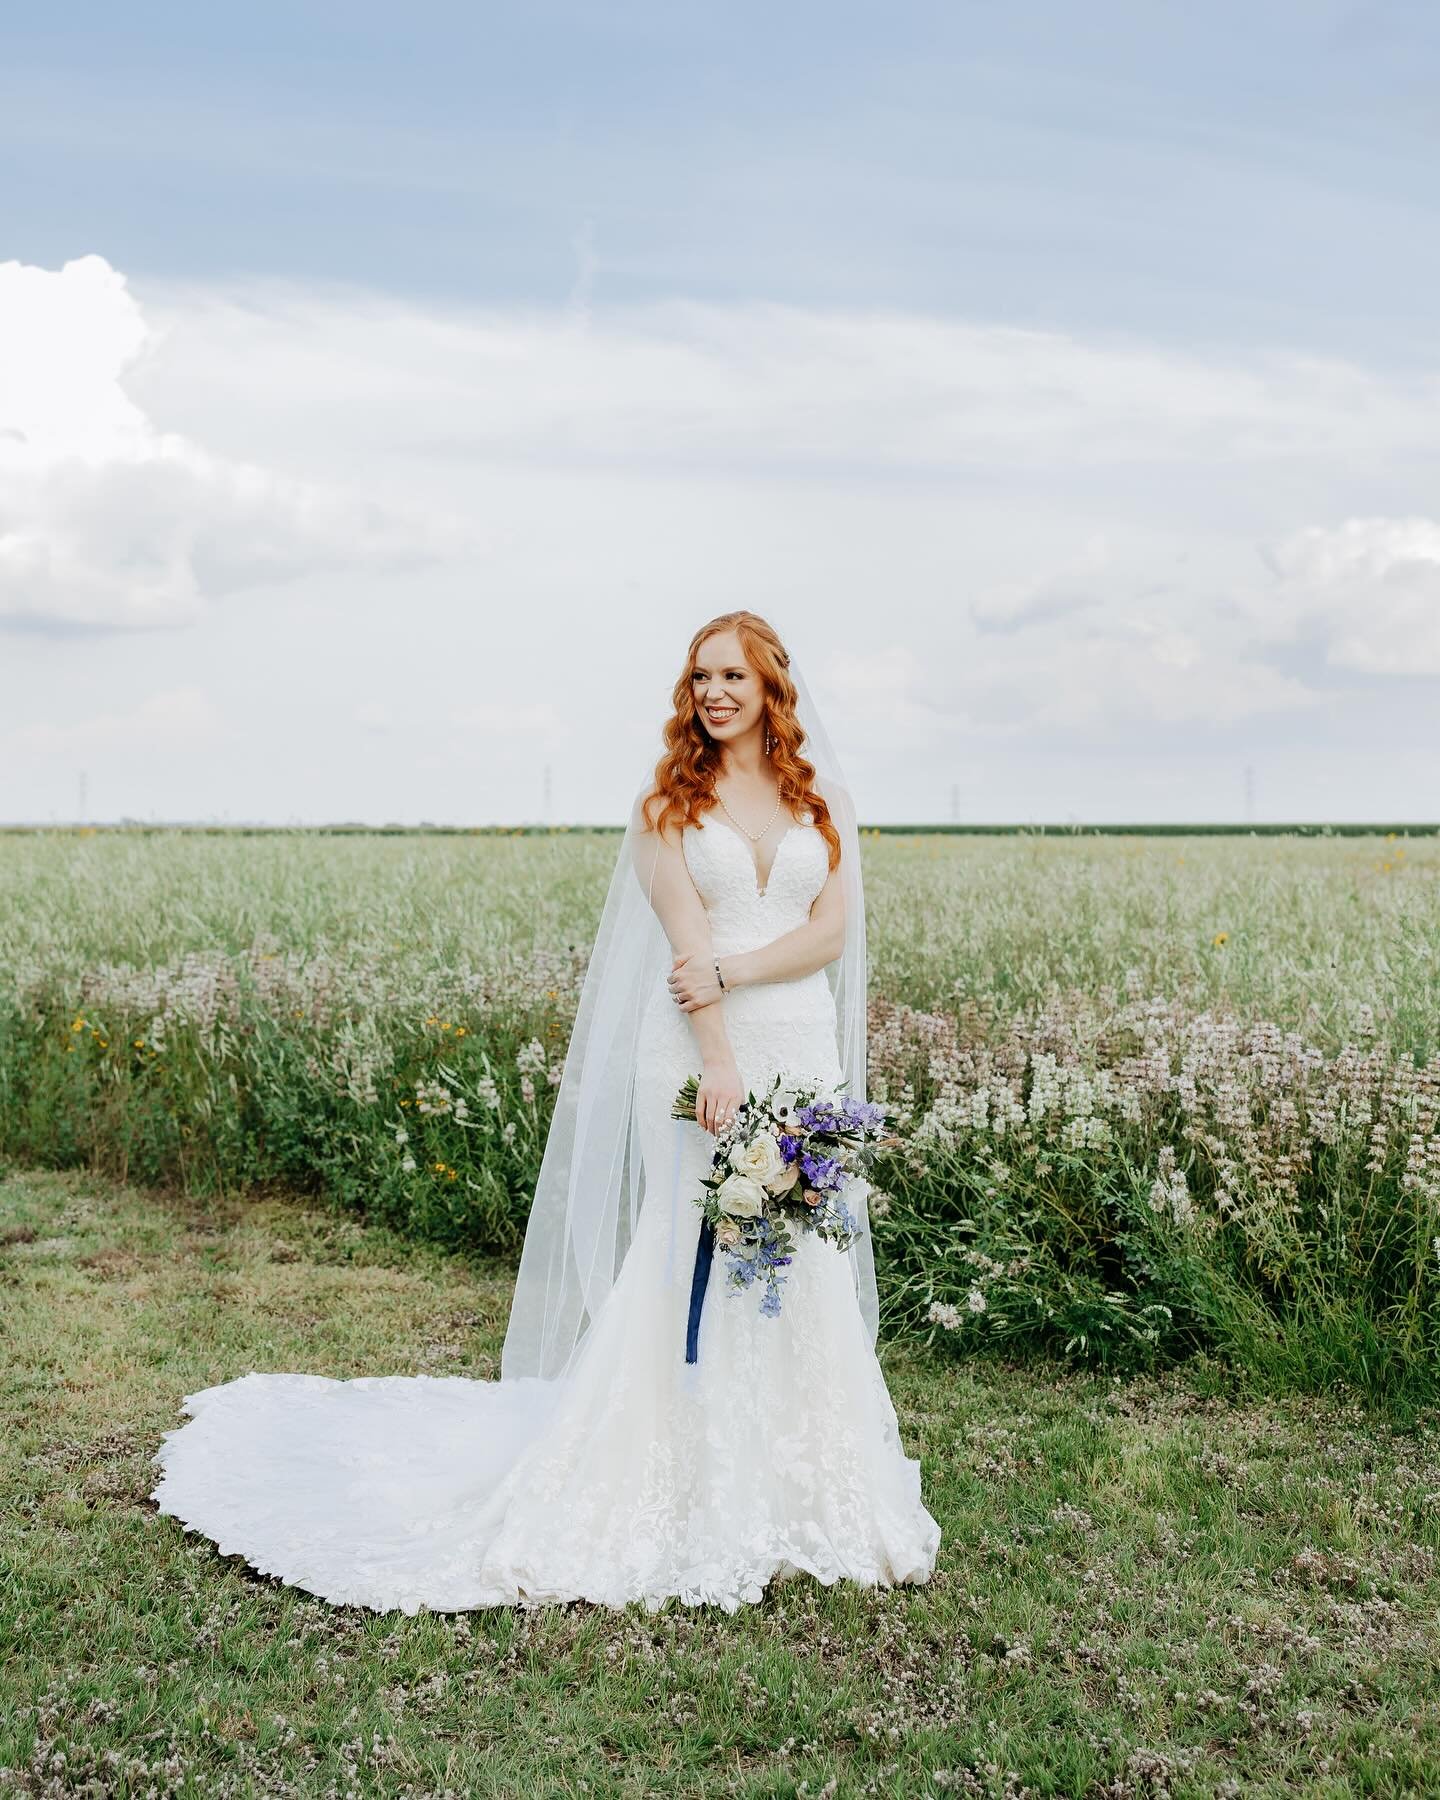 Our beauty Emily in @martinalianabridal captured dreamily by @halliesosolikphotography 

Venue: @theallenfarmhaus 
Bride: @redroller1 
HMUA: @southern.tease 
Florals: @kbrashears2031